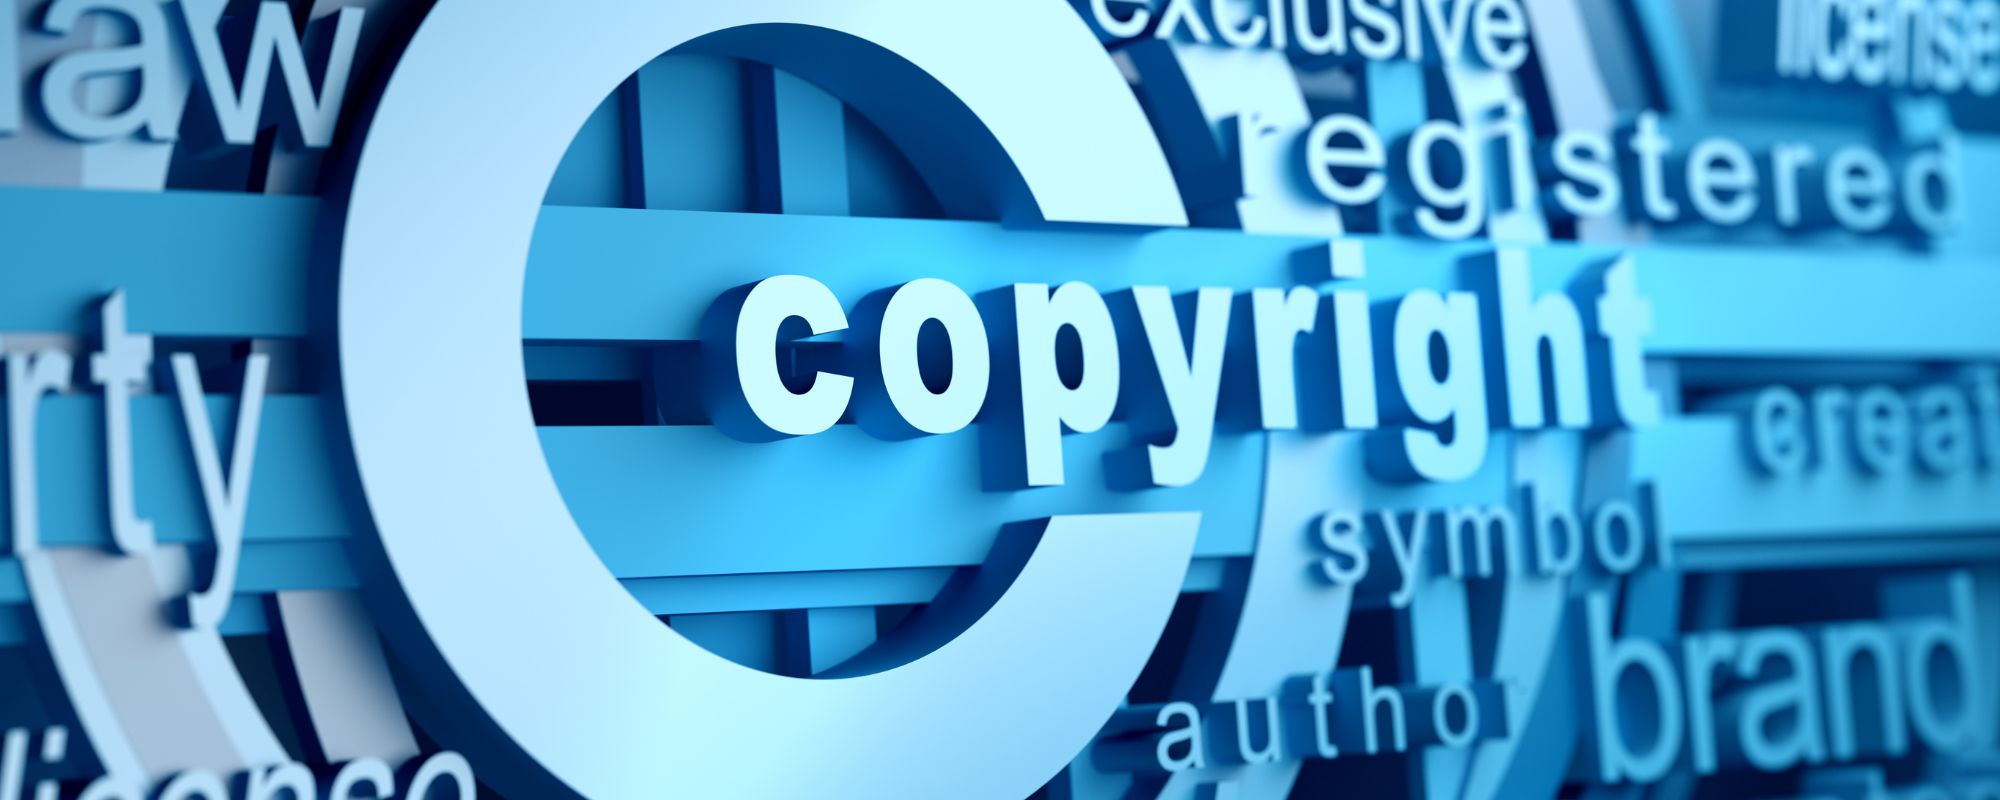 Copyright words in a word cloud - How to Get Online Content Taken Down for Copyright Infringement